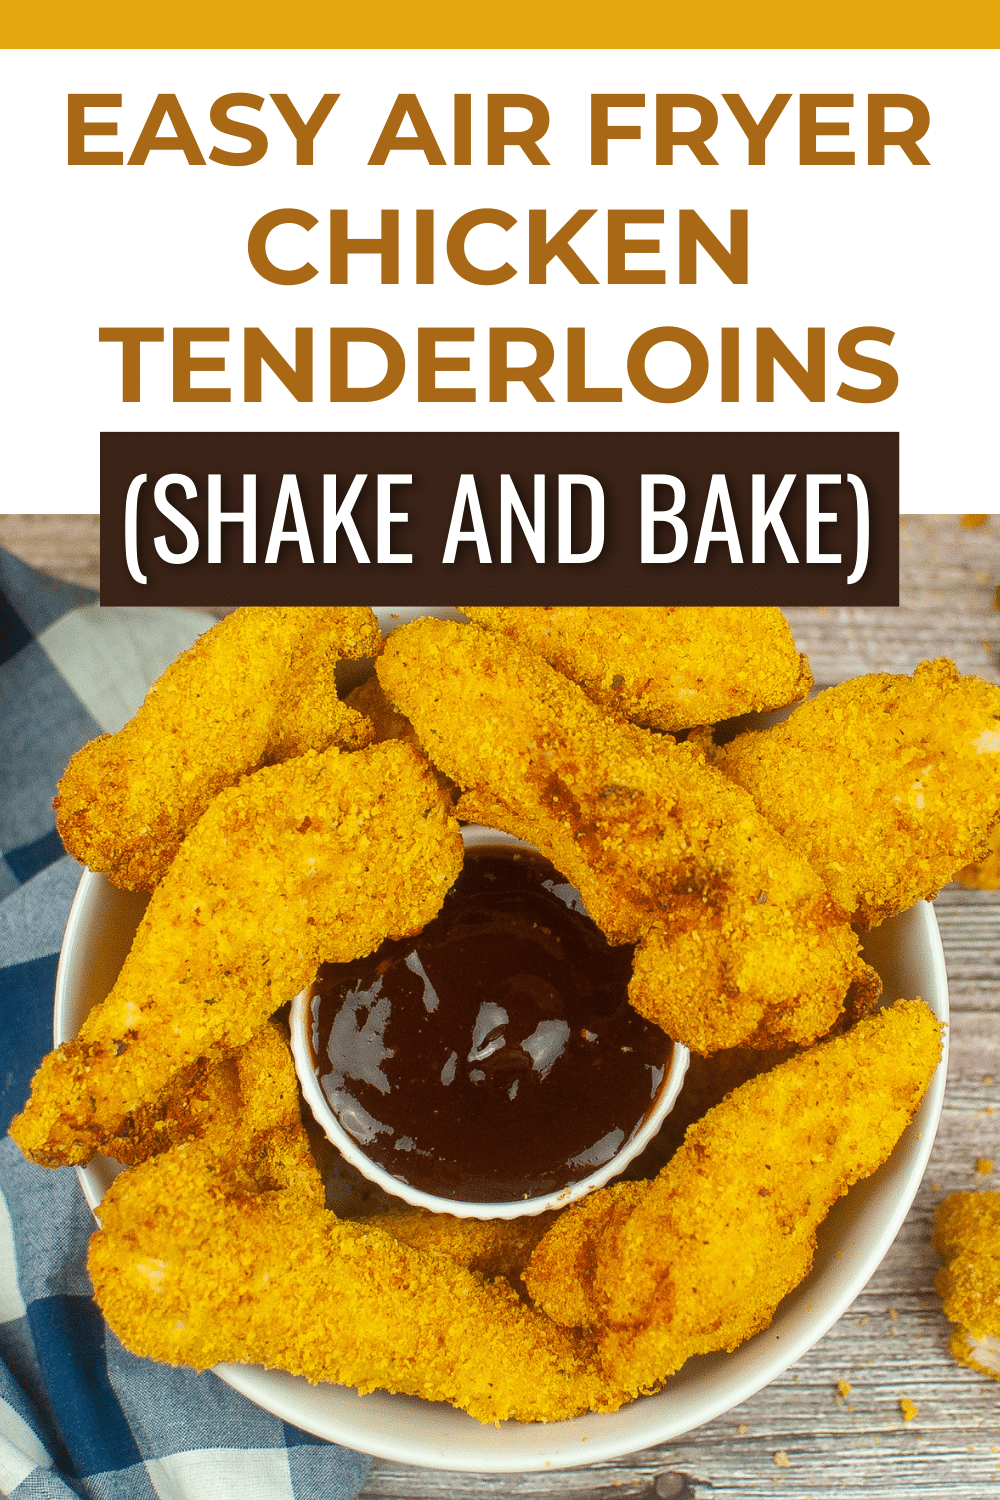 These Air Fryer Chicken Tenderloins are crispy on the outside and juicy on the inside making them a family favorite! #airfryerchickentenderloins #airfryer #chickentenderloins #shakeandbake #chicken via @wondermomwannab